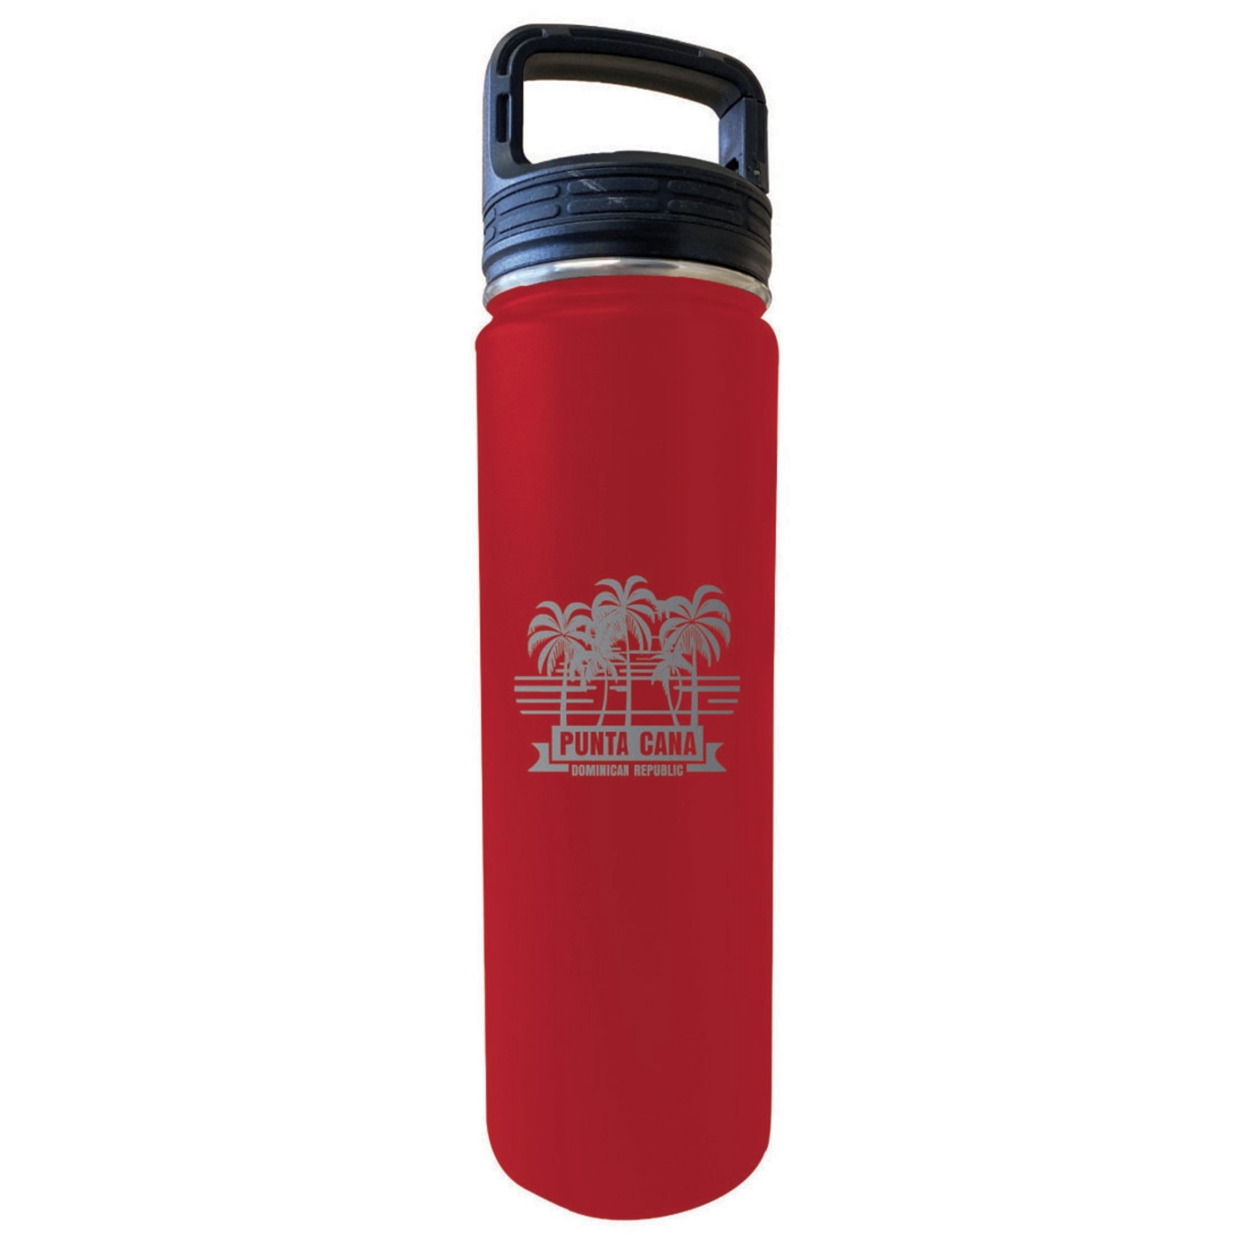 Punta Cana Dominican Republic Souvenir 32 Oz Insulated Stainless Steel Tumbler - Red, Palm 2